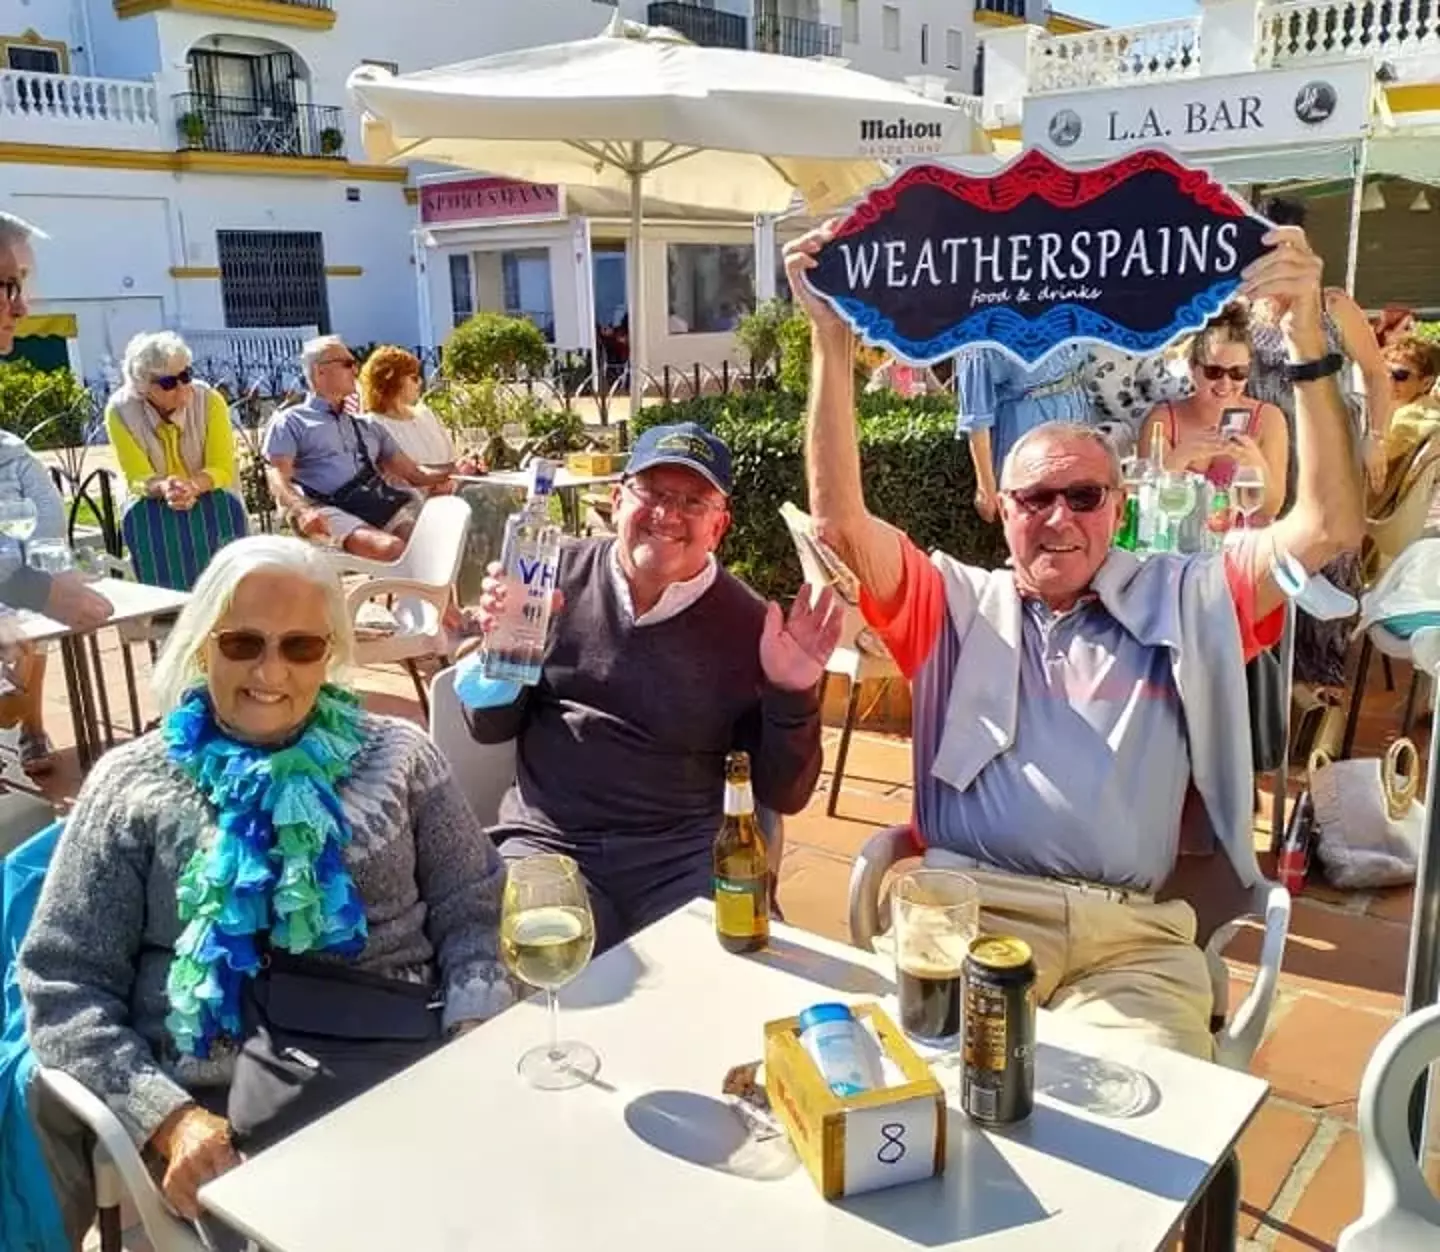 Punters have rated Weatherspains highly online.